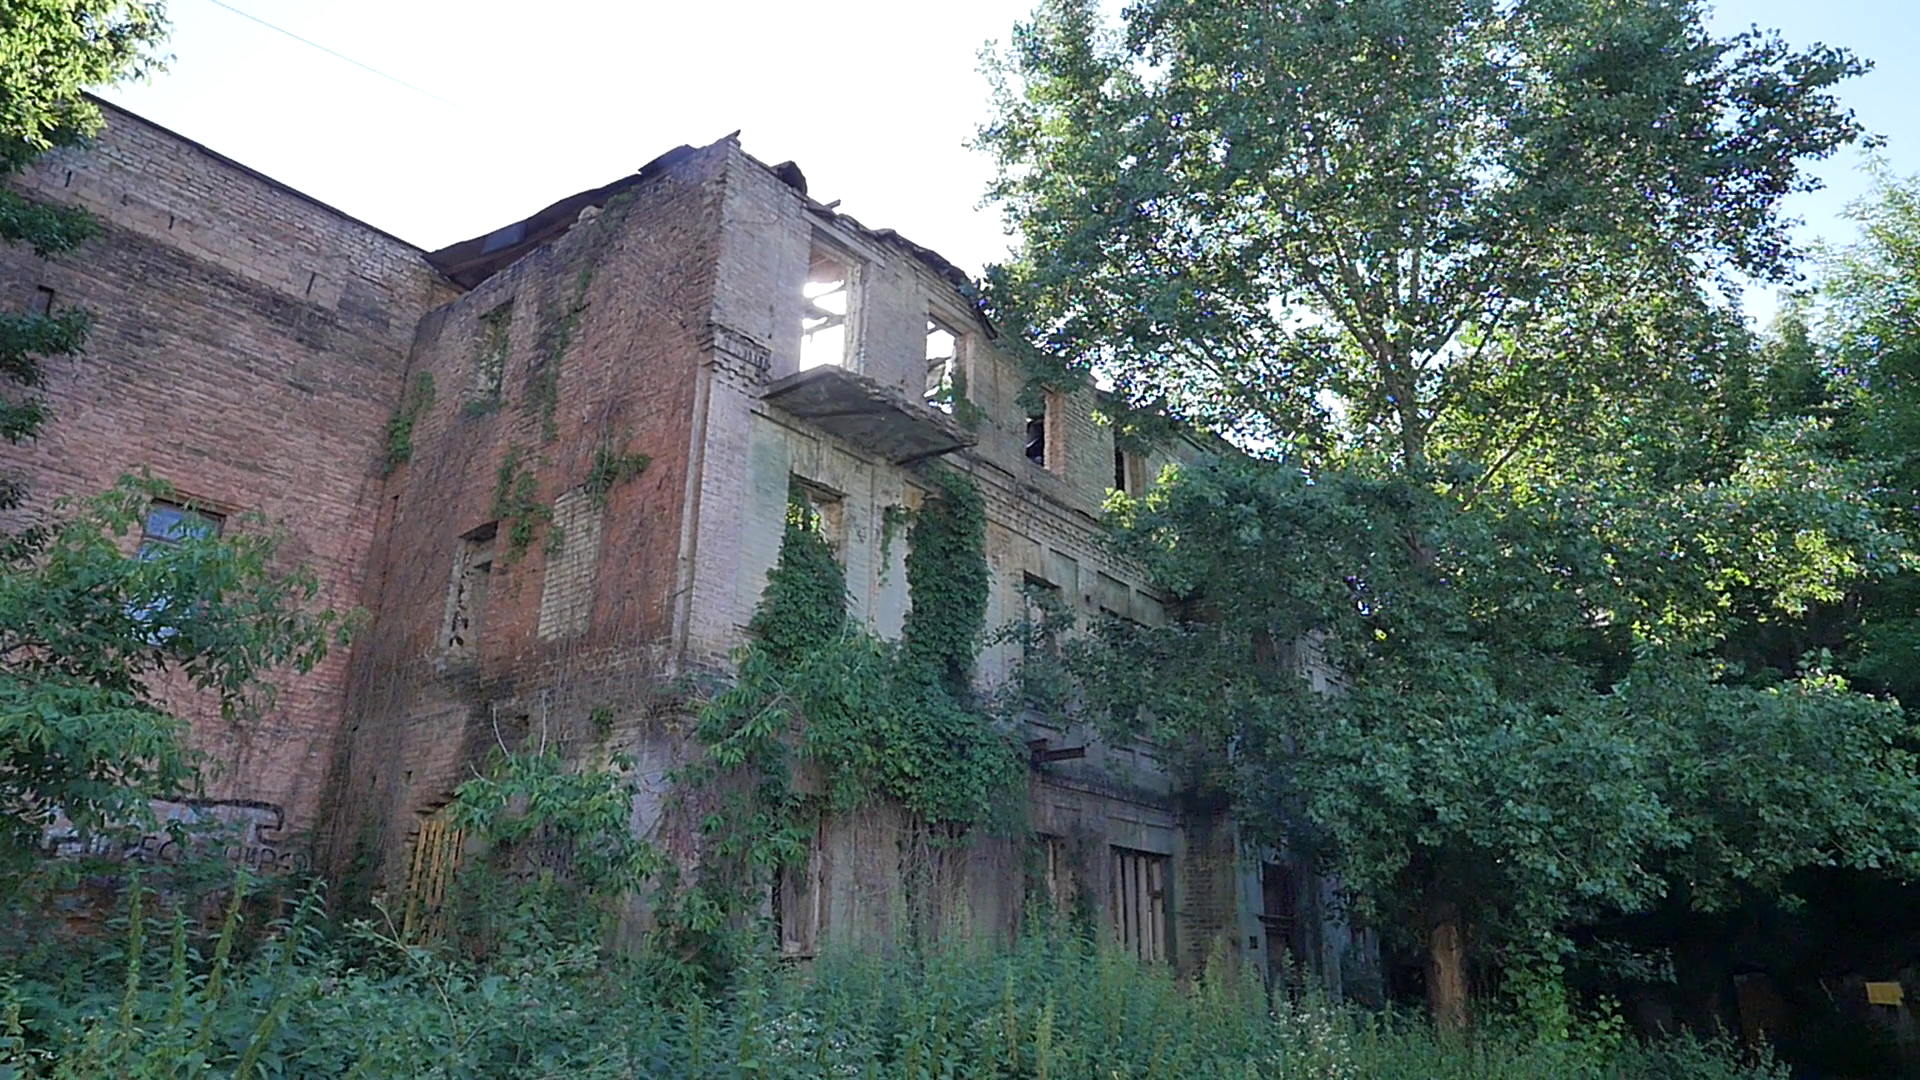 Sun Shines Over Lovely Abandoned Bricks Buildings Overgrown With ...